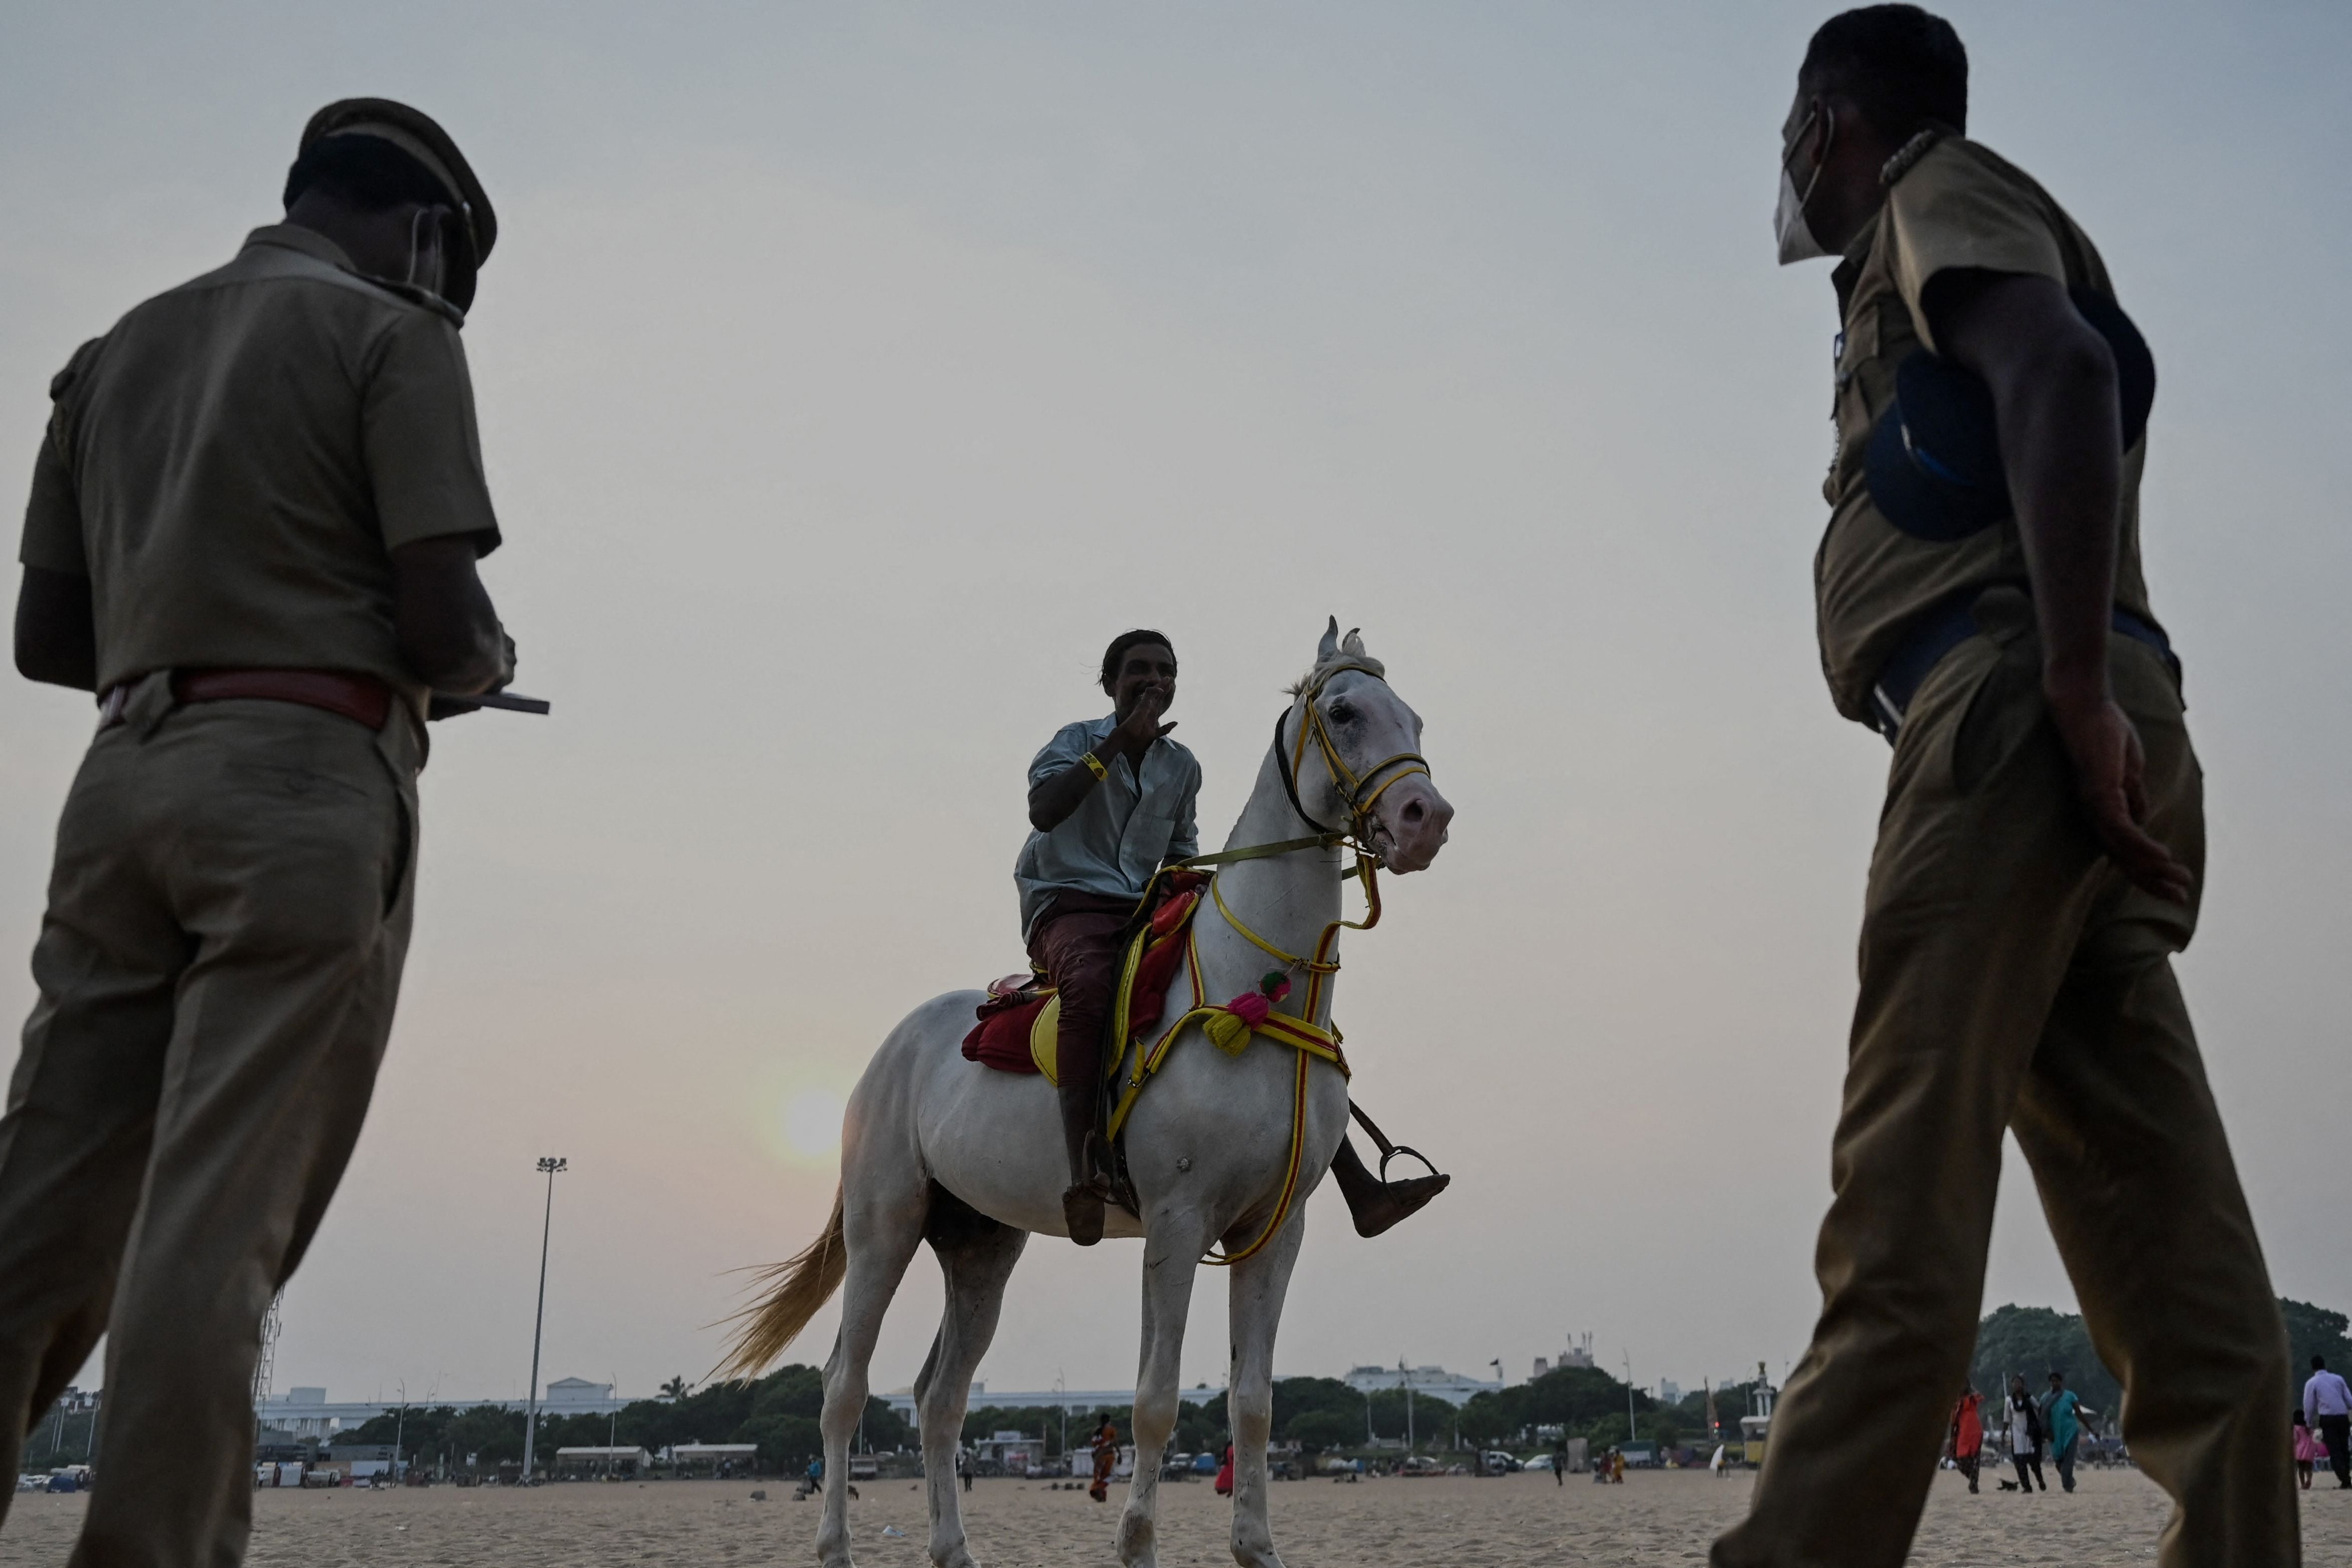 Police personnel stand at Marina beach in Chennai, Tamil Nadu